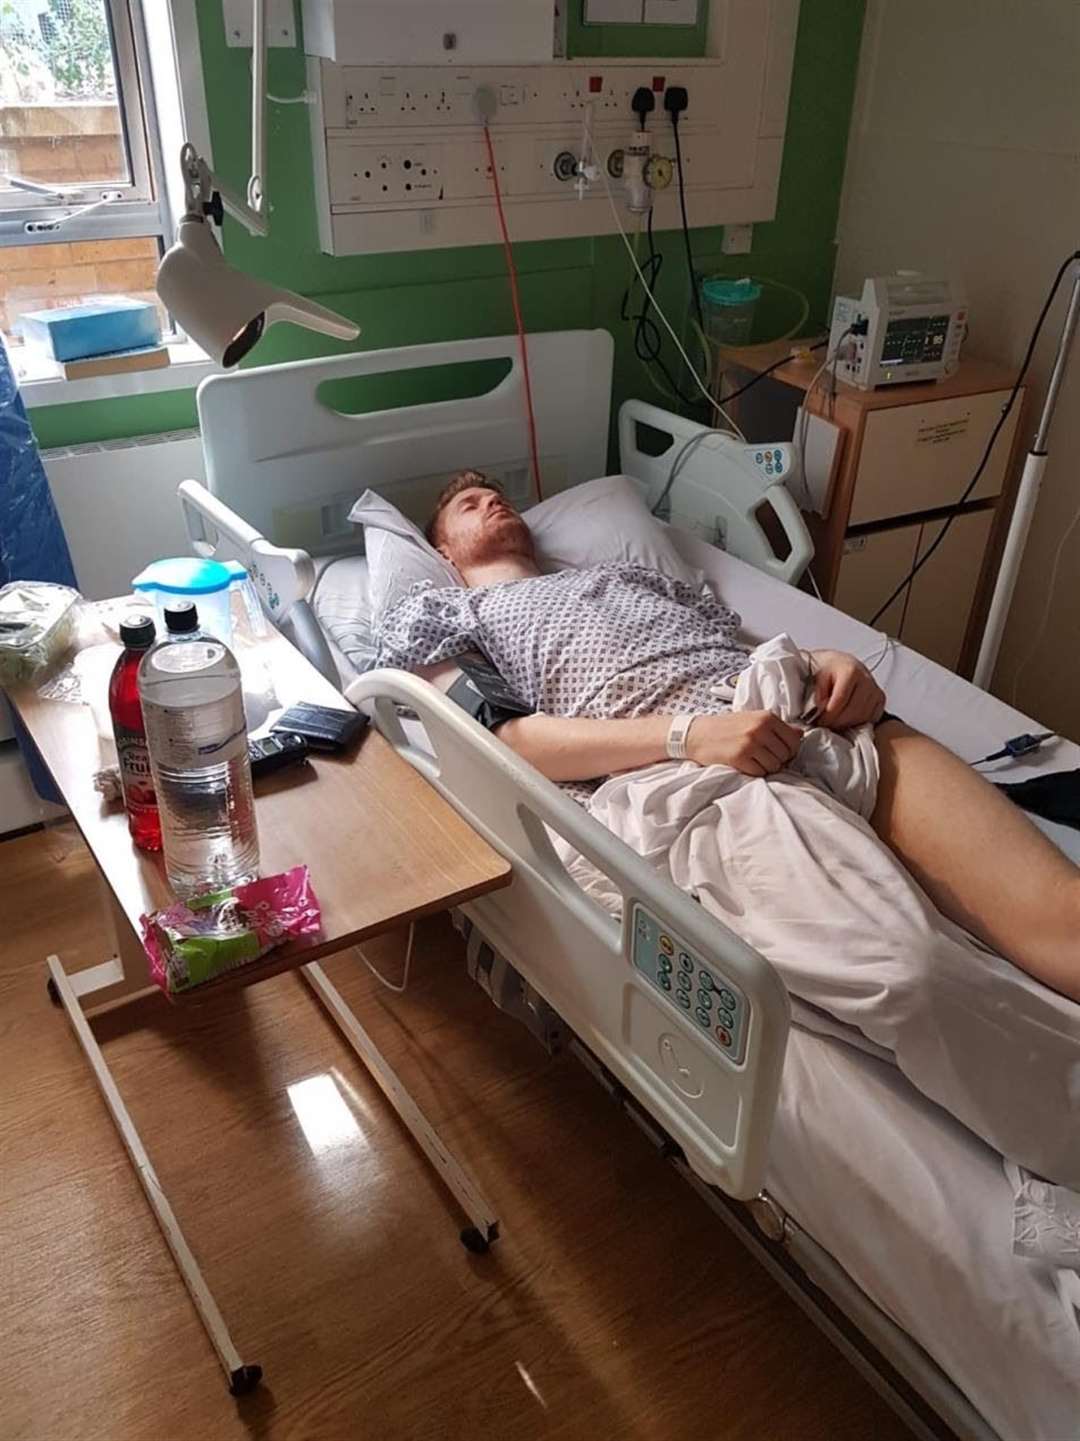 Nick Gilbert was hospitalised after contracting meningitis in 2018.